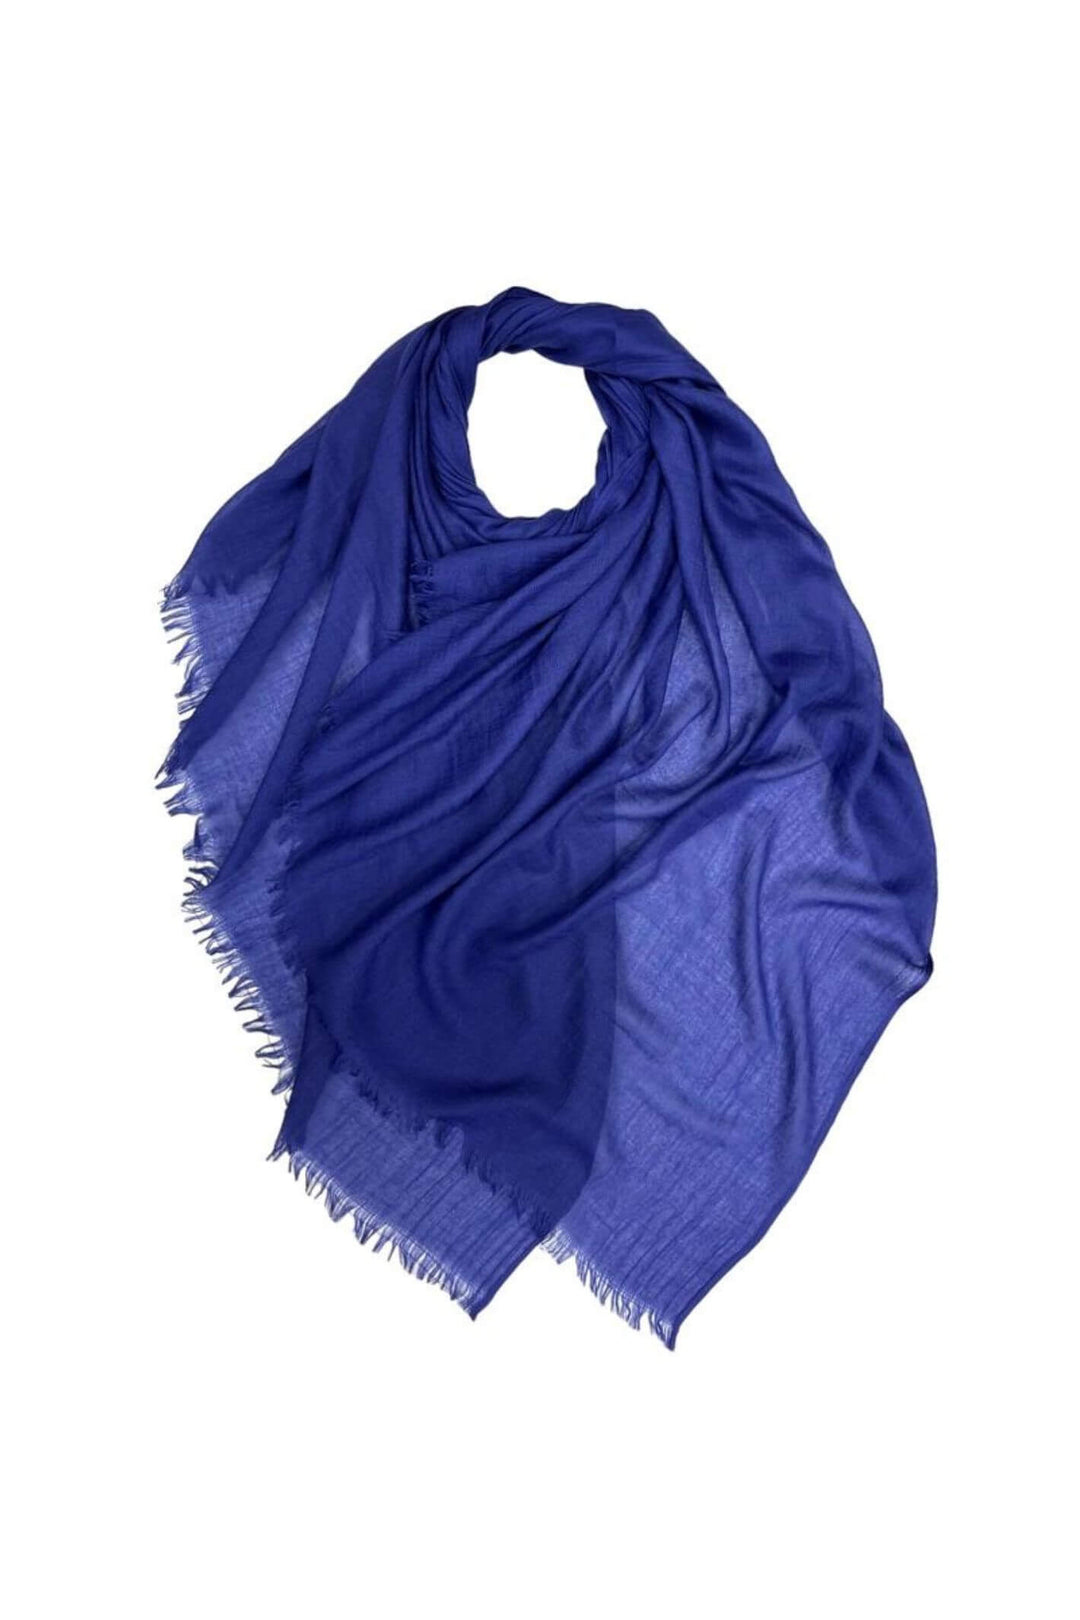 Royal Blue Cotton Woven Scarf With Fringed Edge